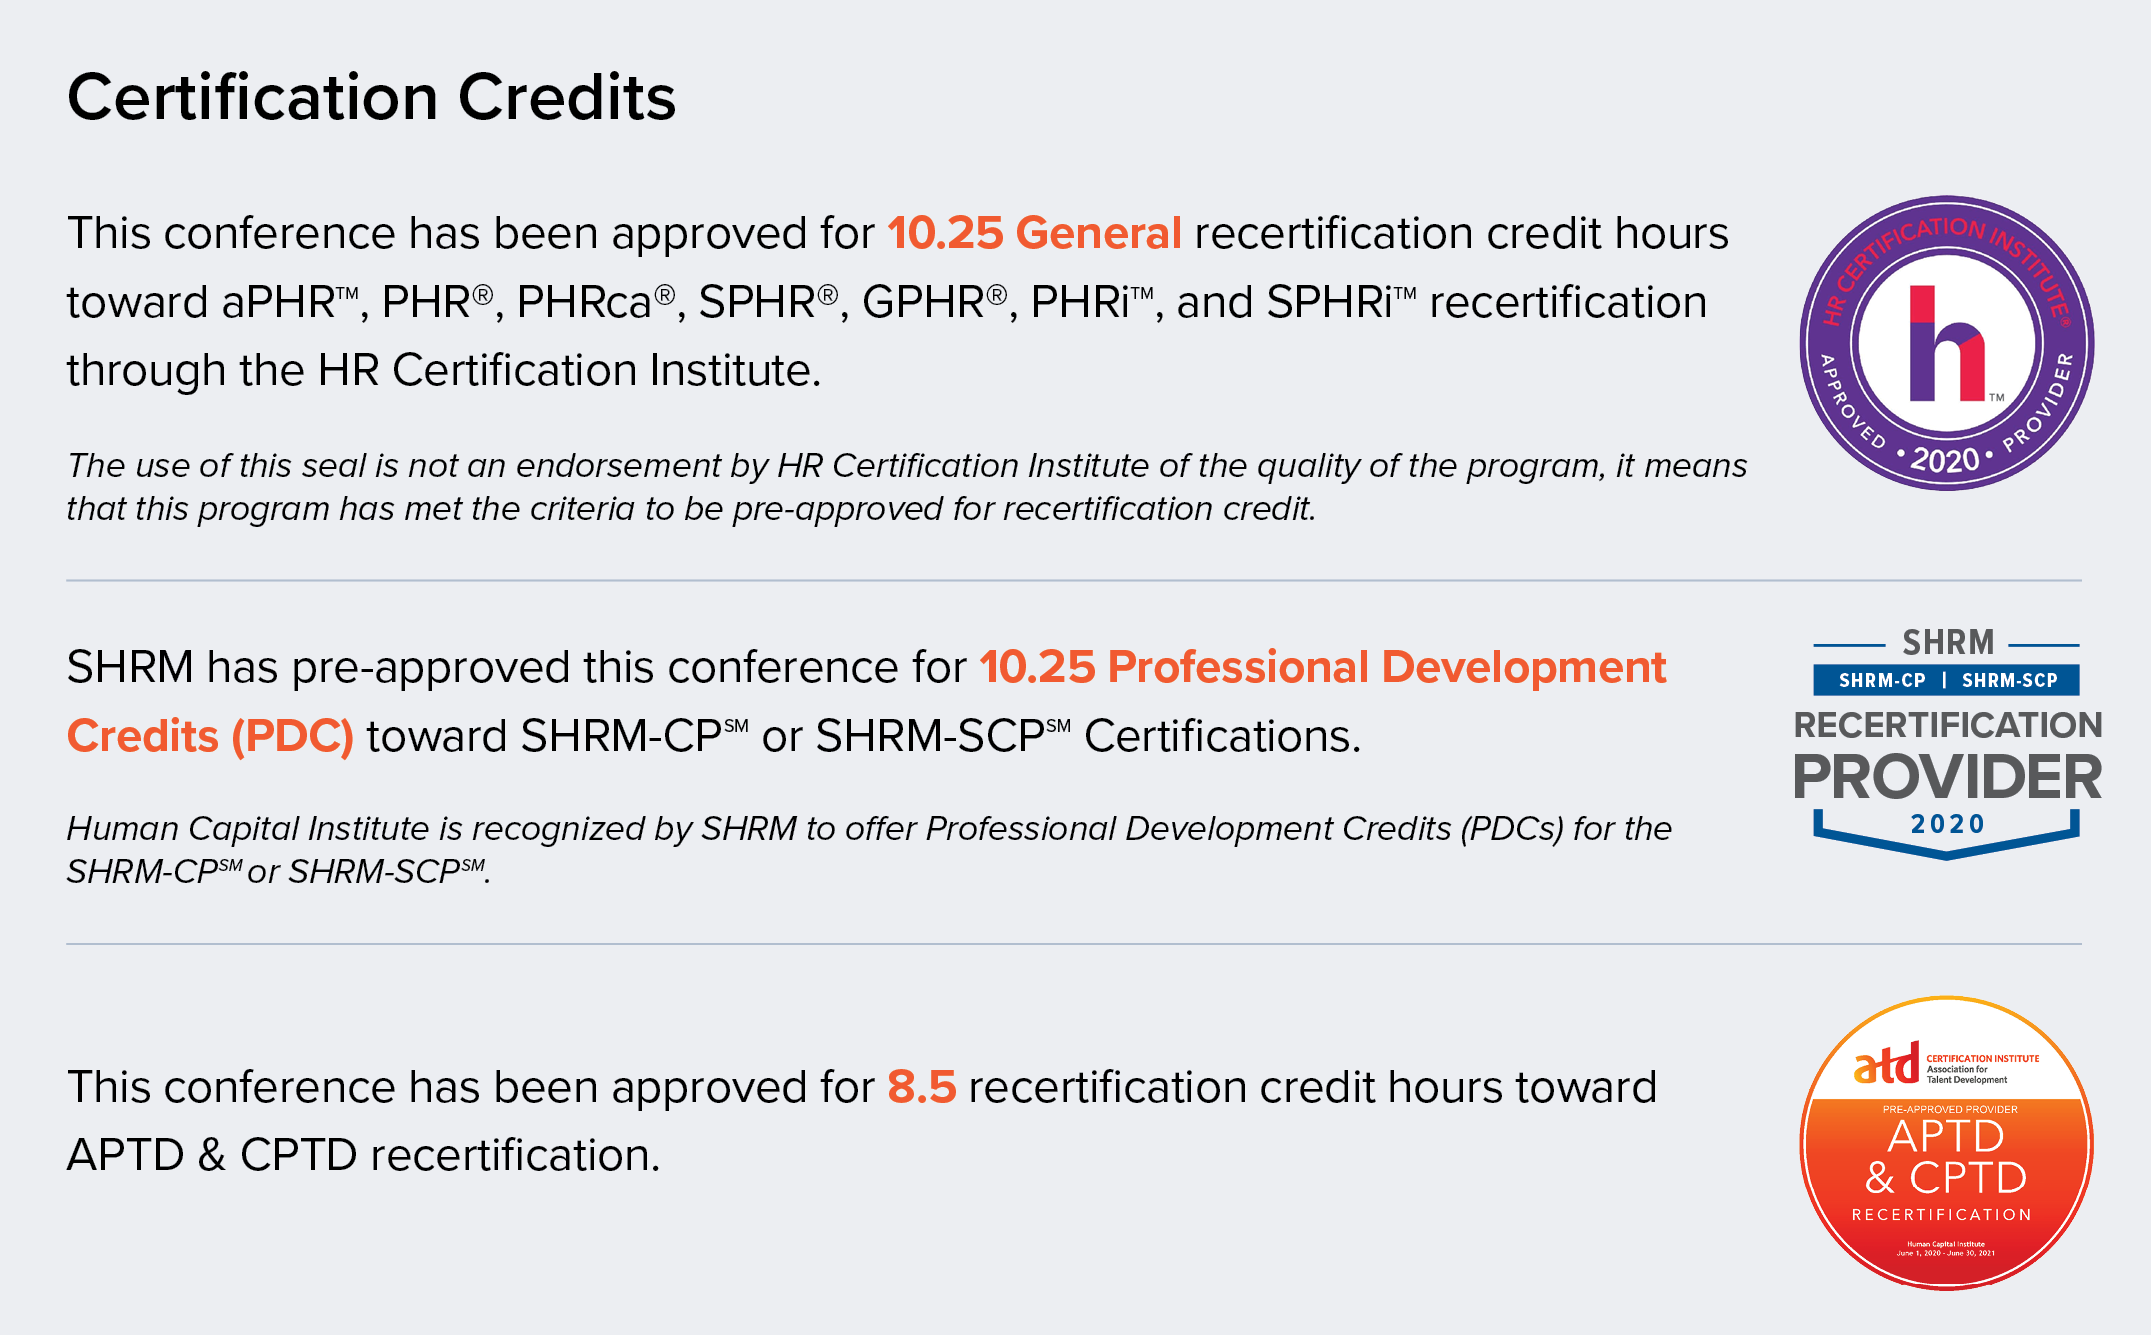 Certification Credits for EE_ATD.png 